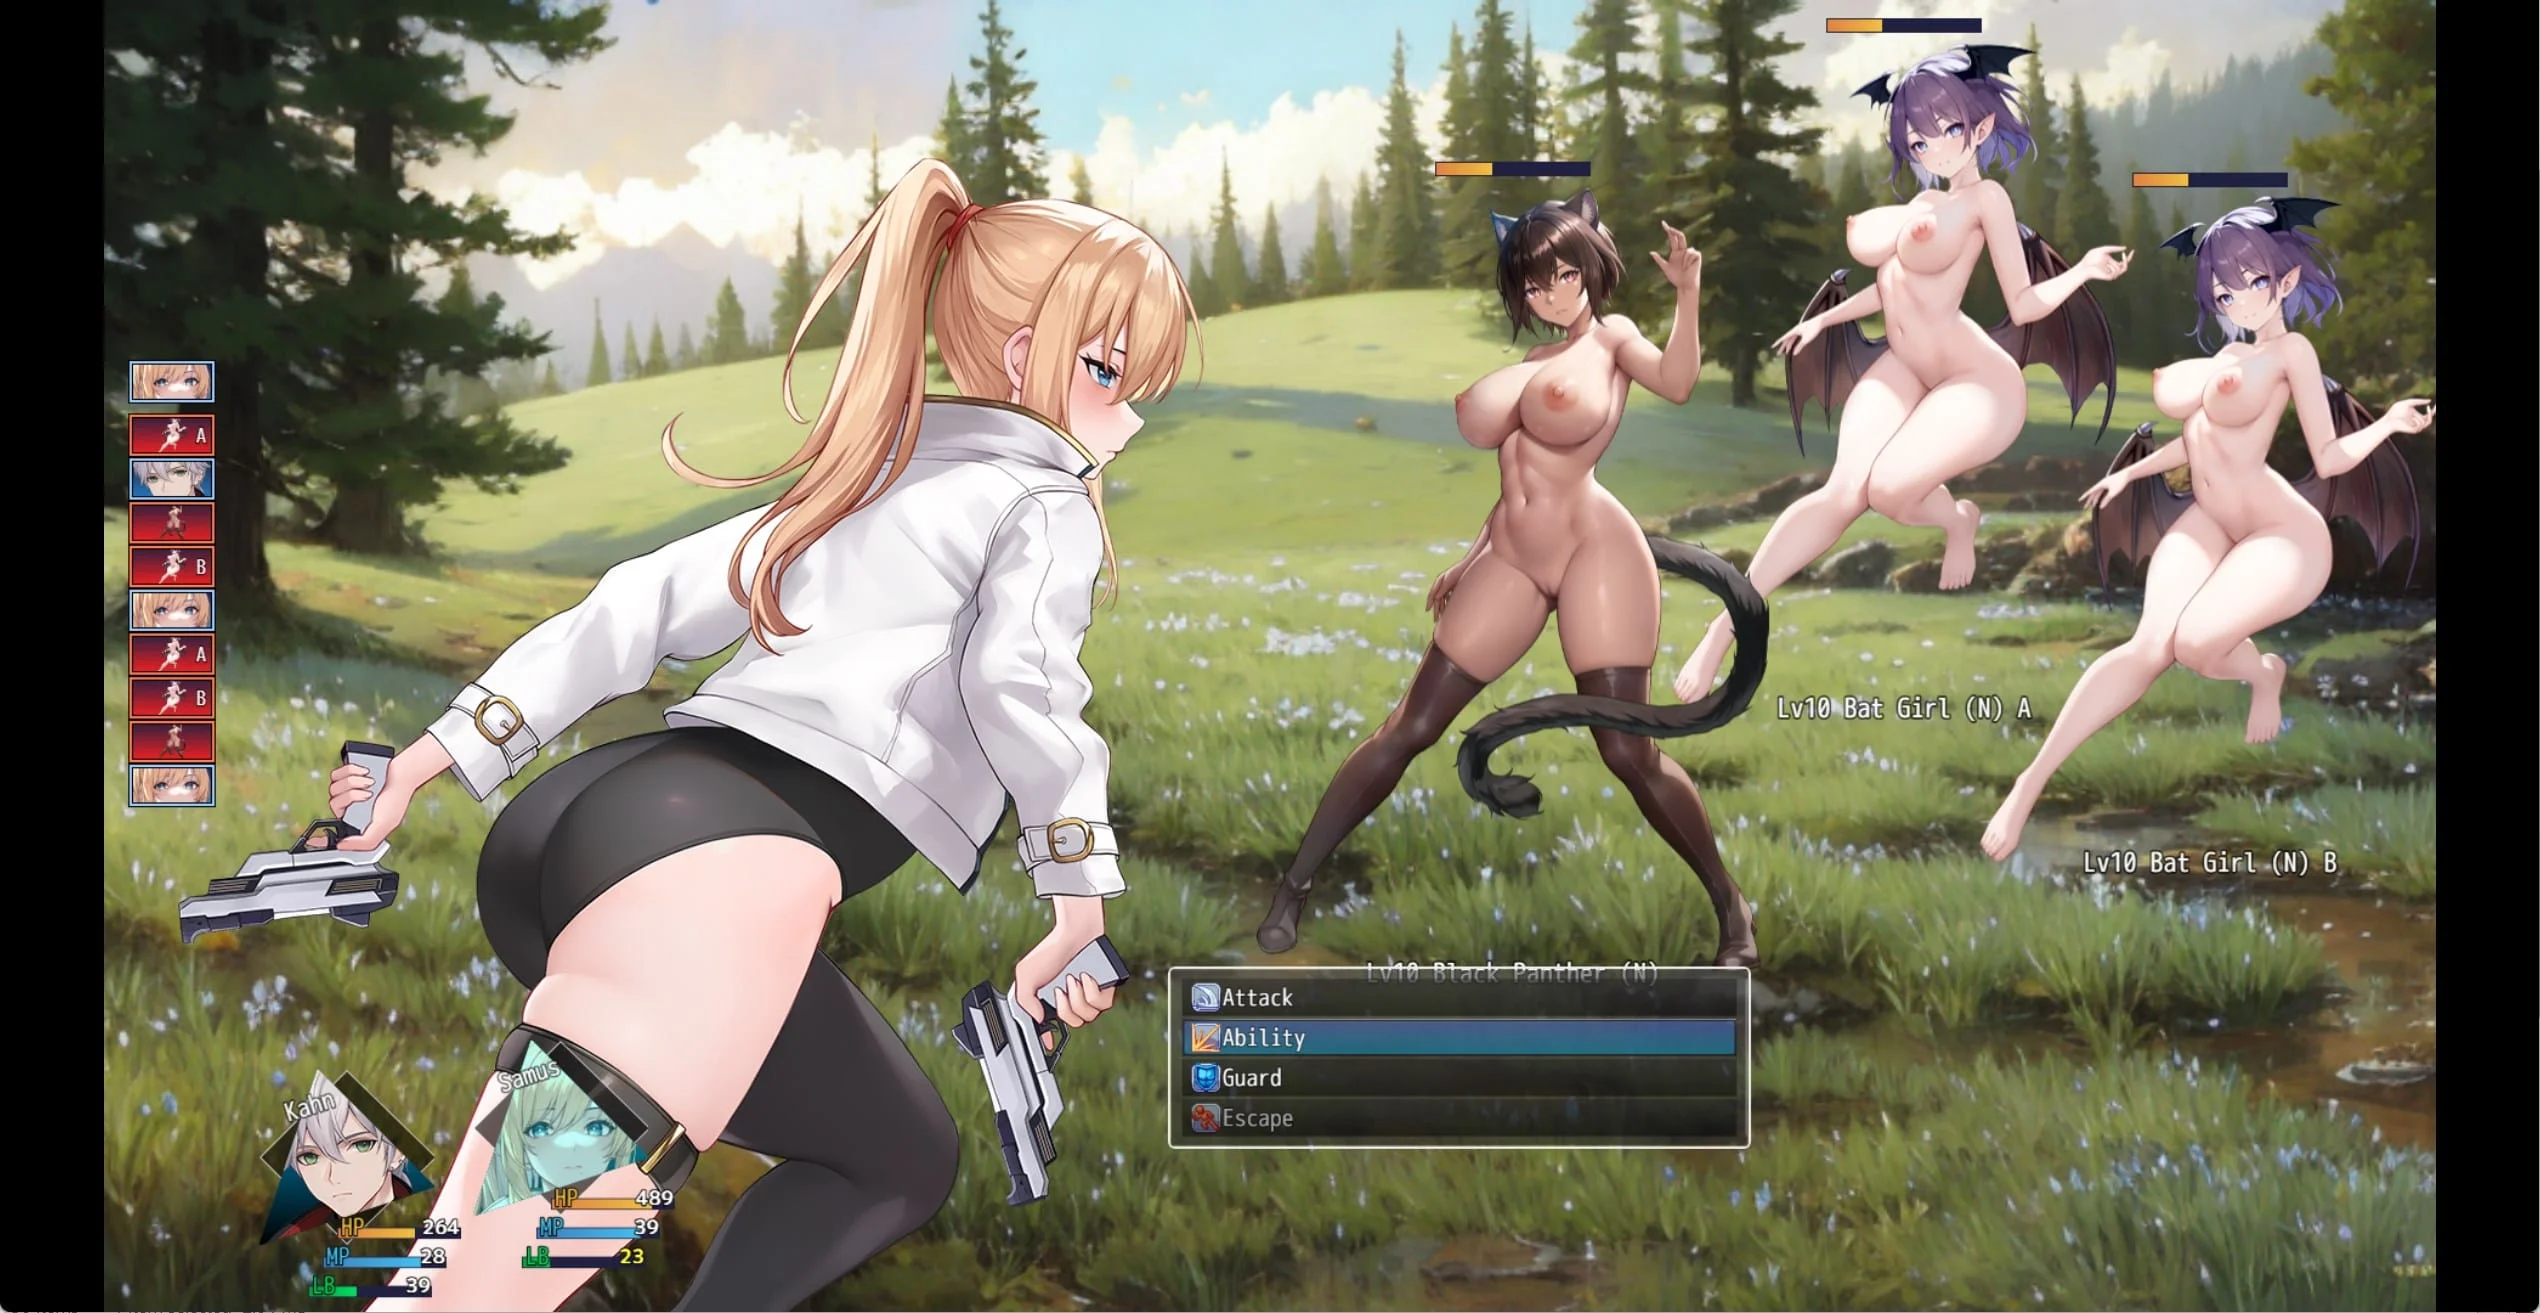 Role playing game hentai games